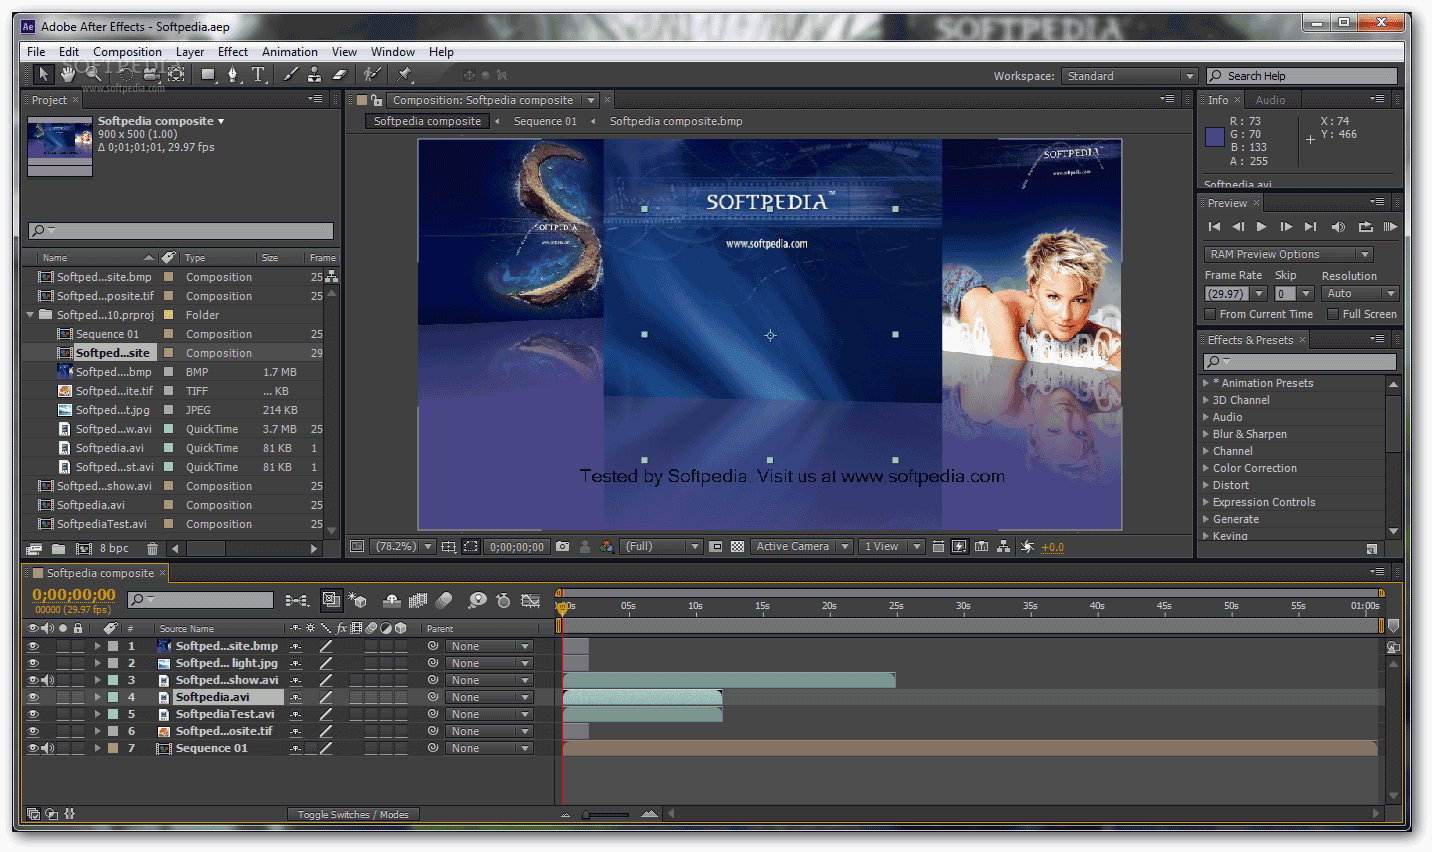 adobe after effects cs5 free download 32 bit with crack